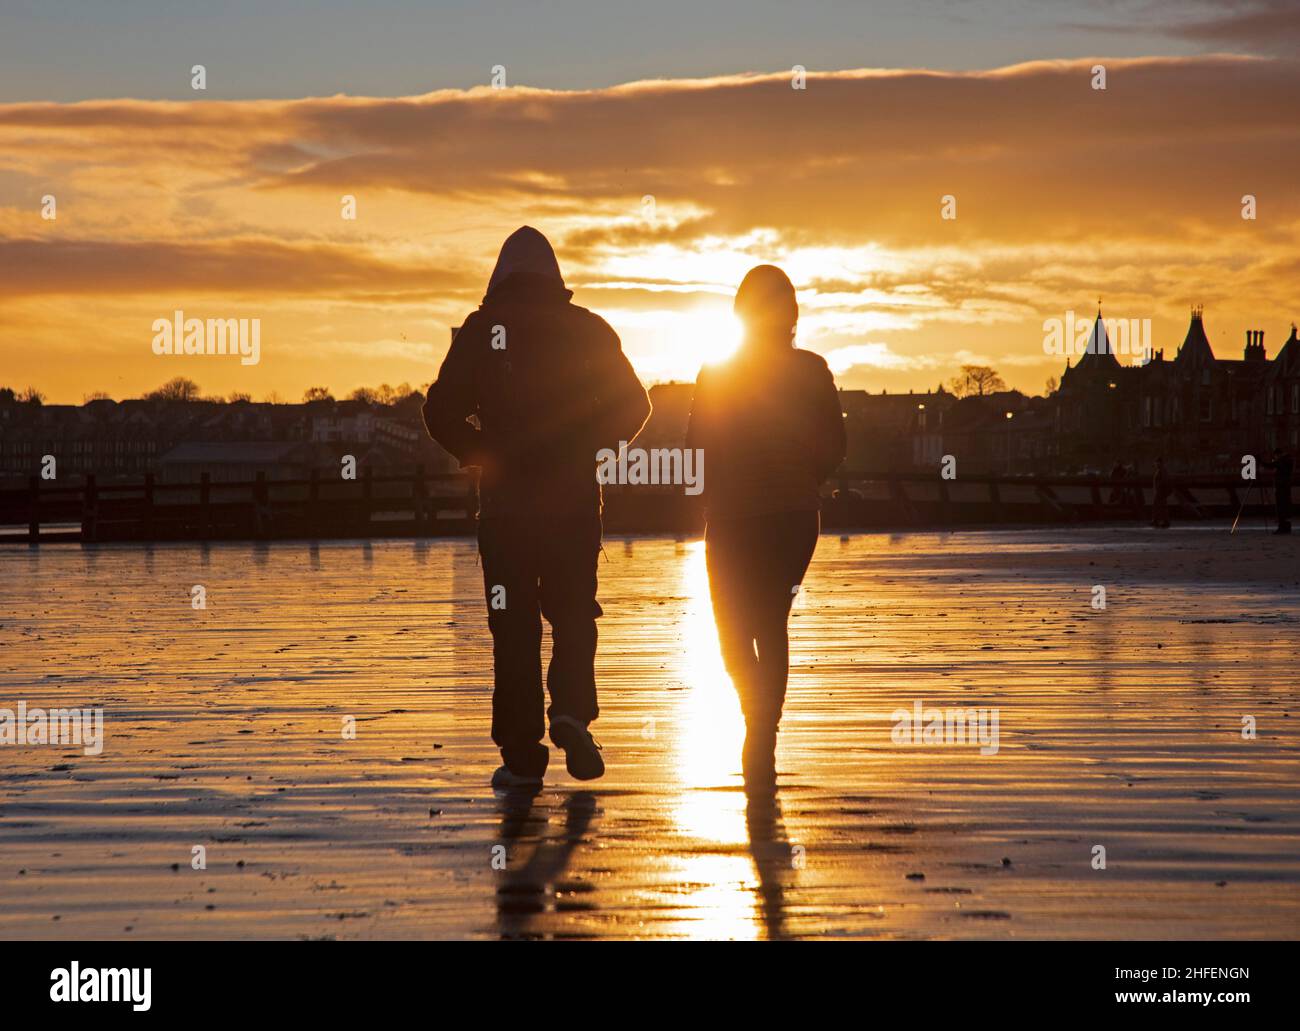 Portobello, Edinburgh, Scotland, UK. 16th January 2022. Finally sunrise sunshine with temperature of 7 degrees after a week of heavy cloud in the skies above the city. Pictured: A young couple take a dawn stroll along the sandy beach at the seaside. Credit: Scottishcreative/Alamy Live News. Stock Photo